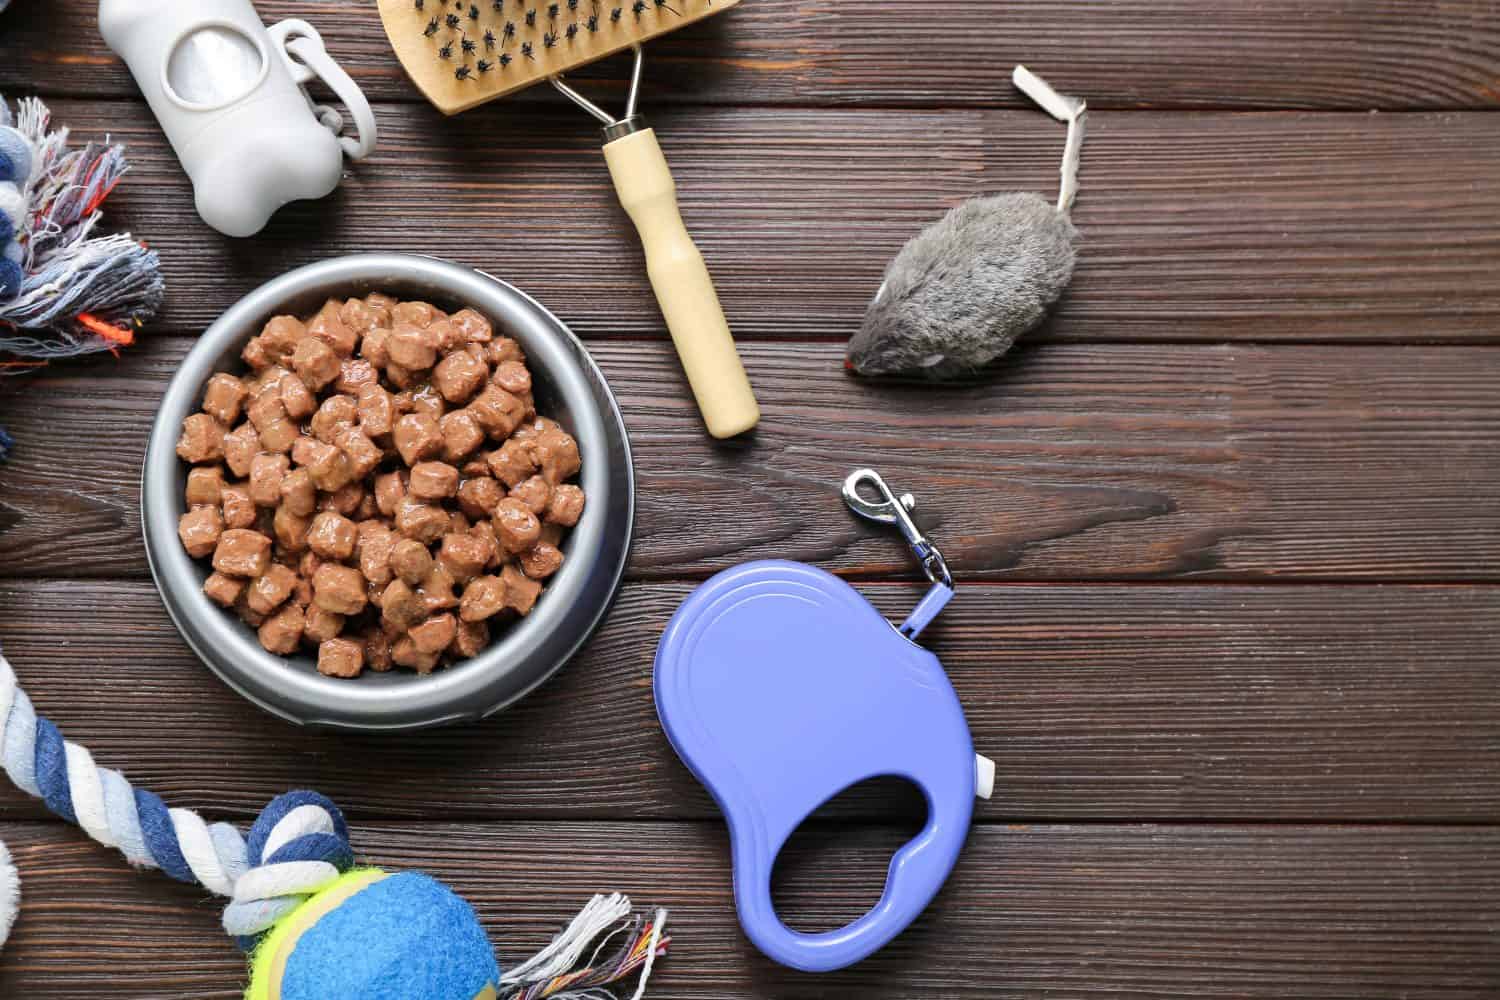 Composition with bowl of wet food and pet care accessories on wooden background